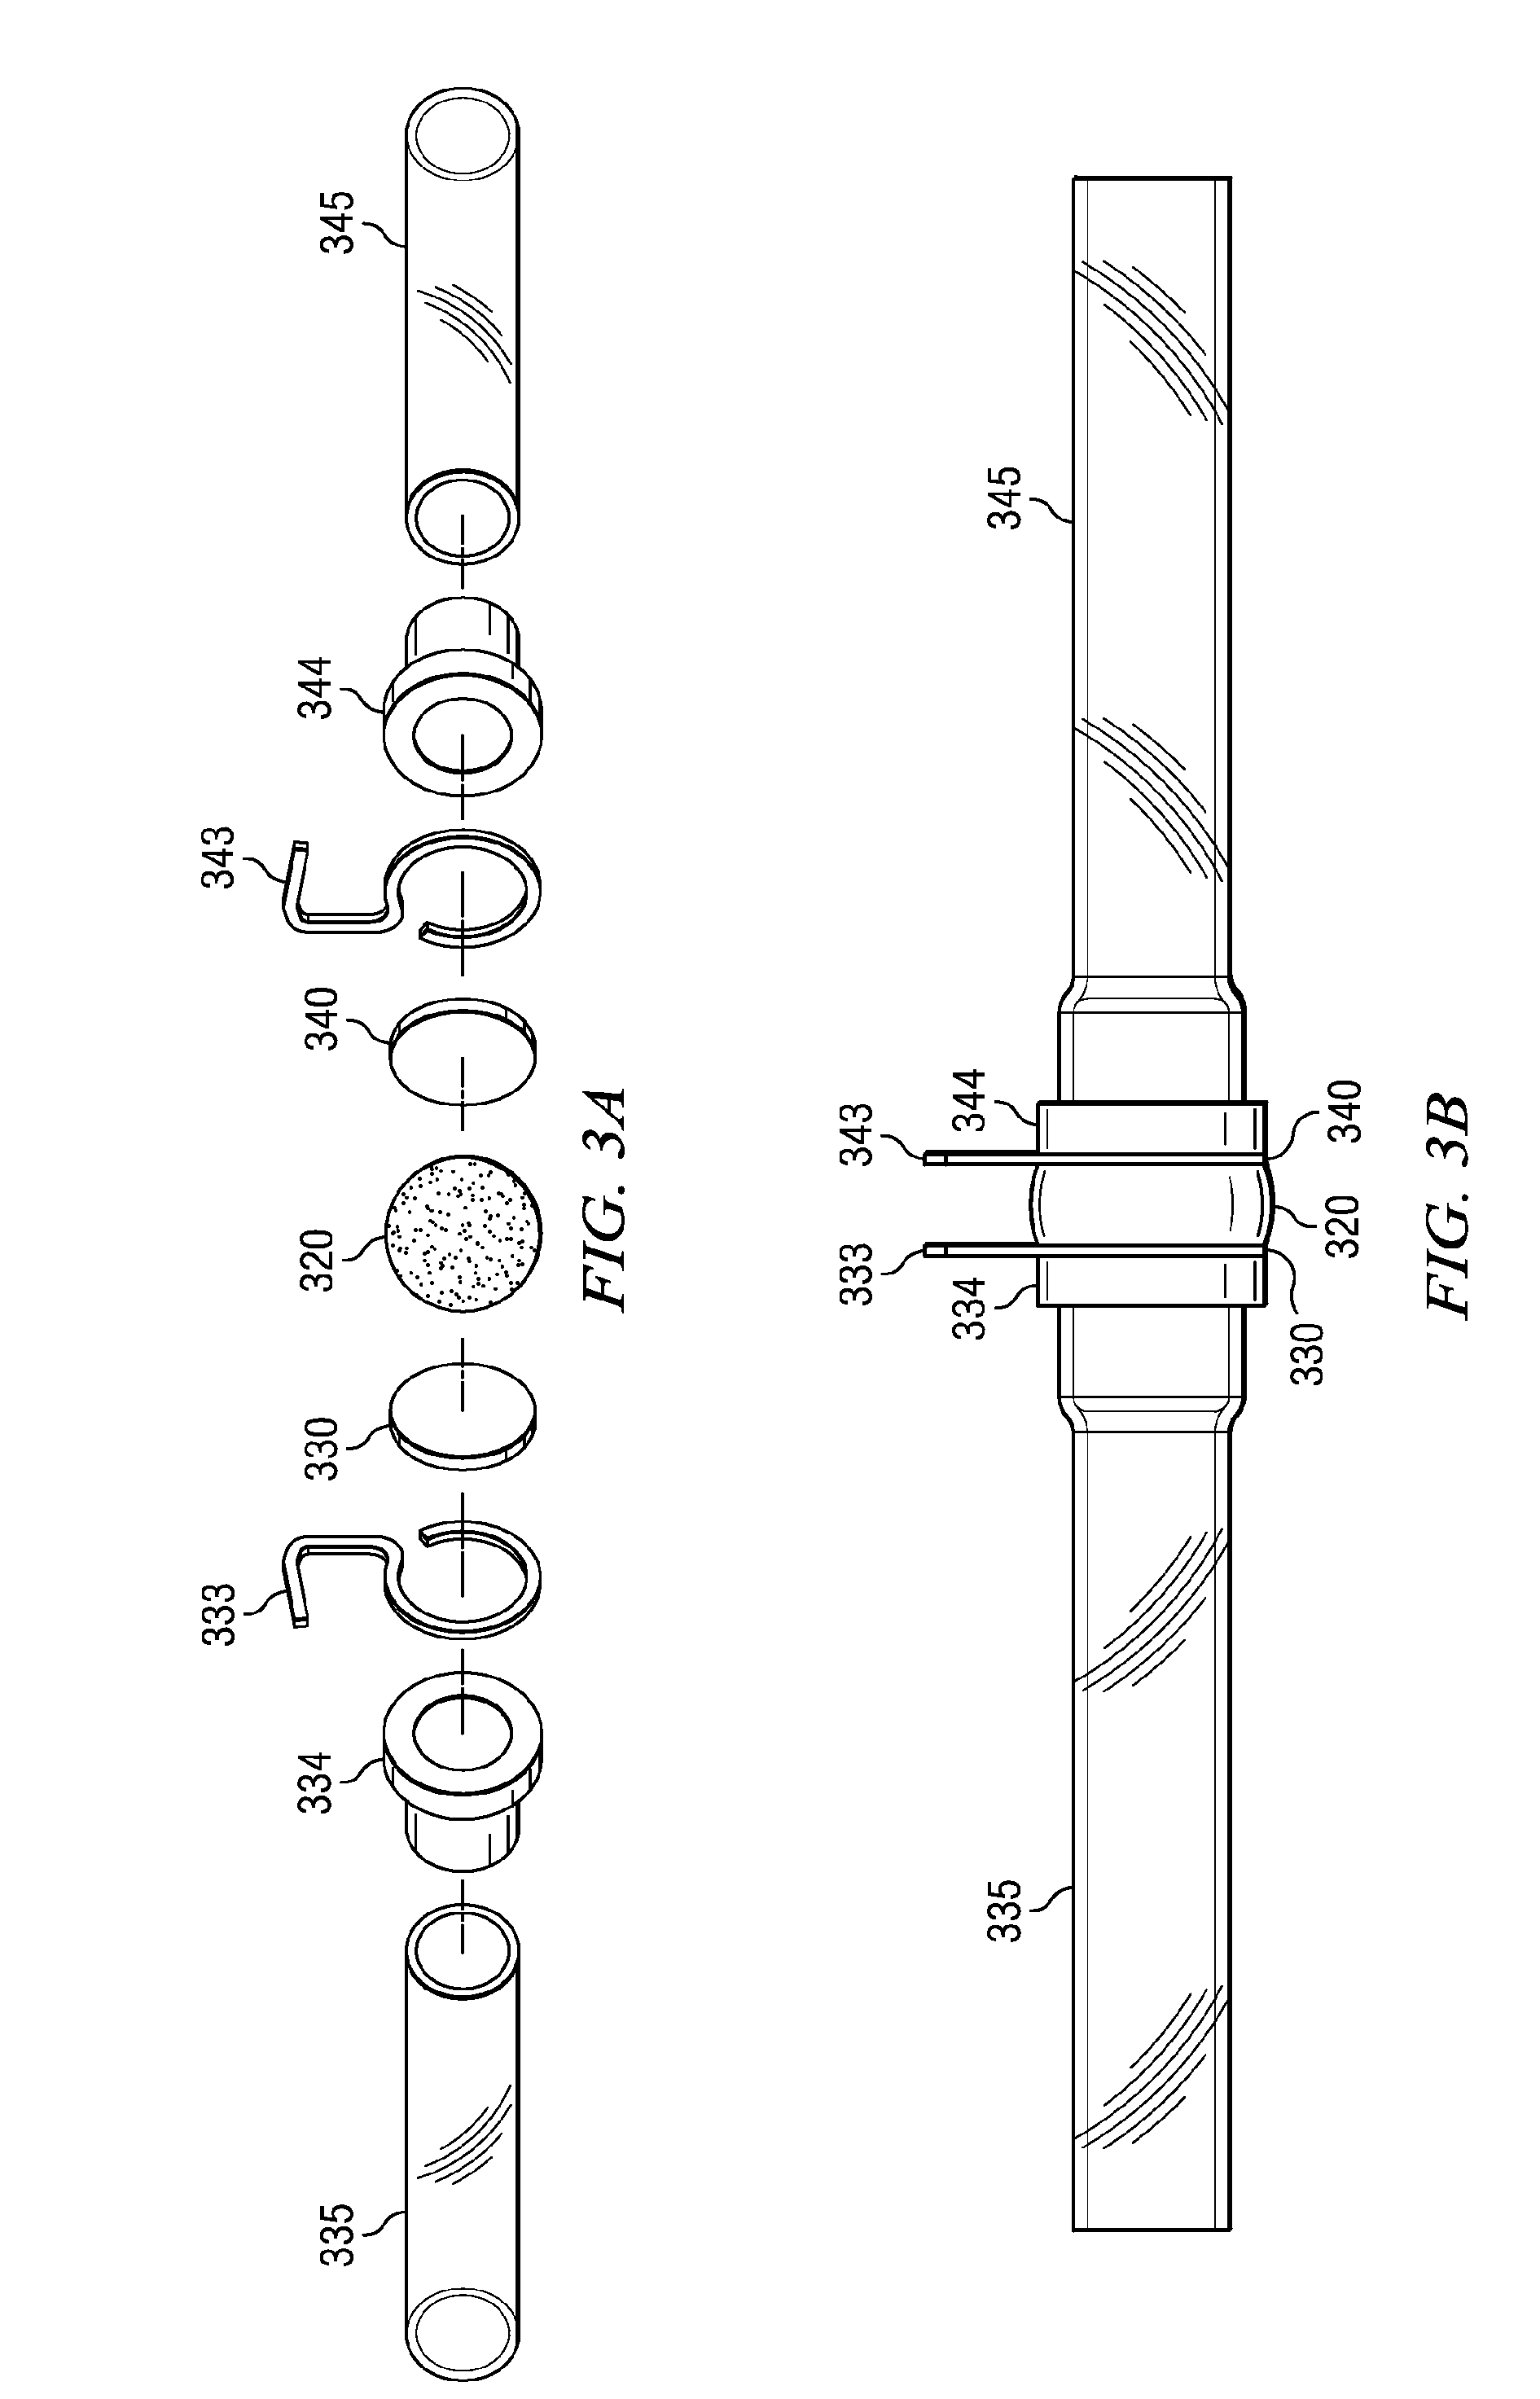 Electro-osmotic pumps, systems, methods, and compositions